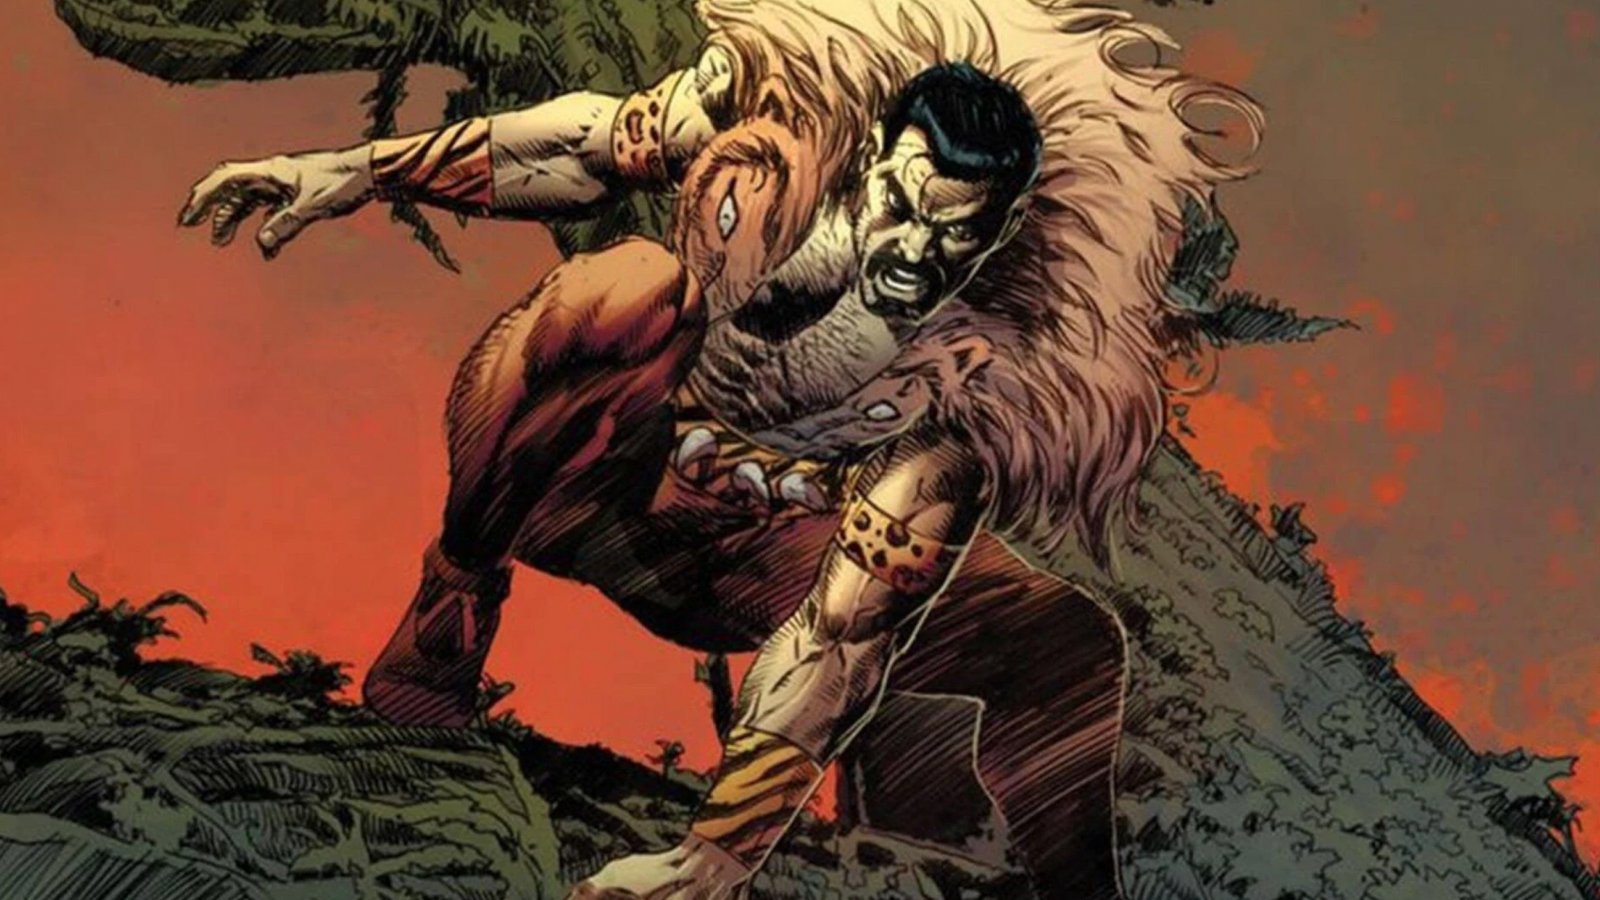 Kraven the Hunter: Footage shown at CinemCon, it will be the first Sony/Marvel Rated R film!